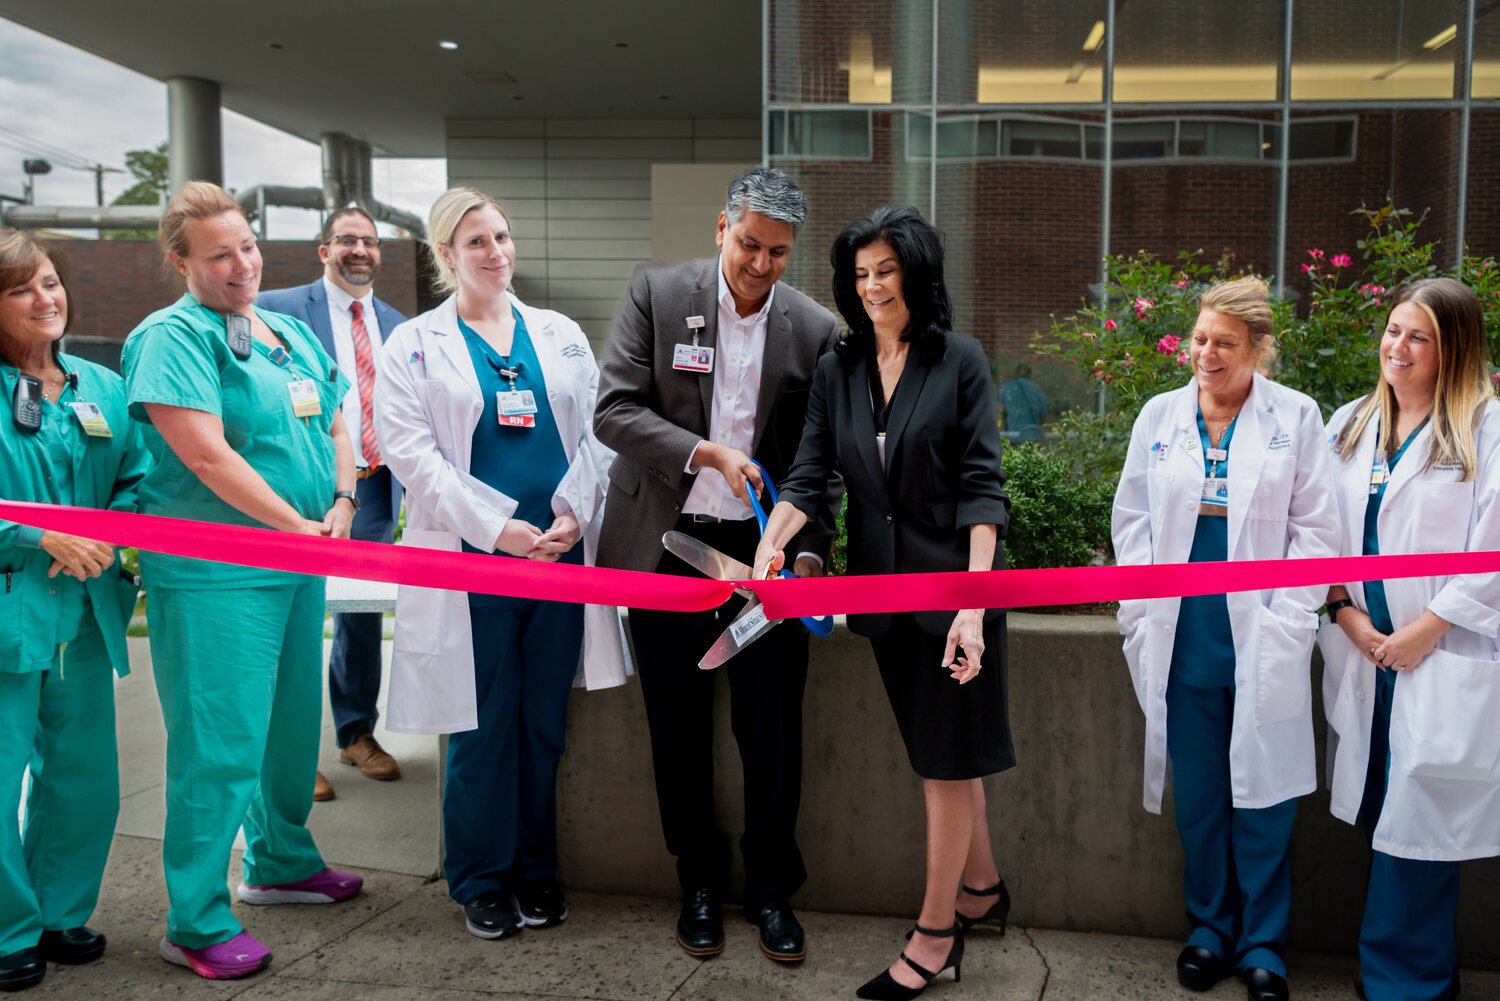 Dr. Adhi Sharma, President, Mount Sinai South Nassau and Lucy Iannucci, Group Director & Senior Vice President, Flagstar Bank cut the ribbon for the new employee recharge area.